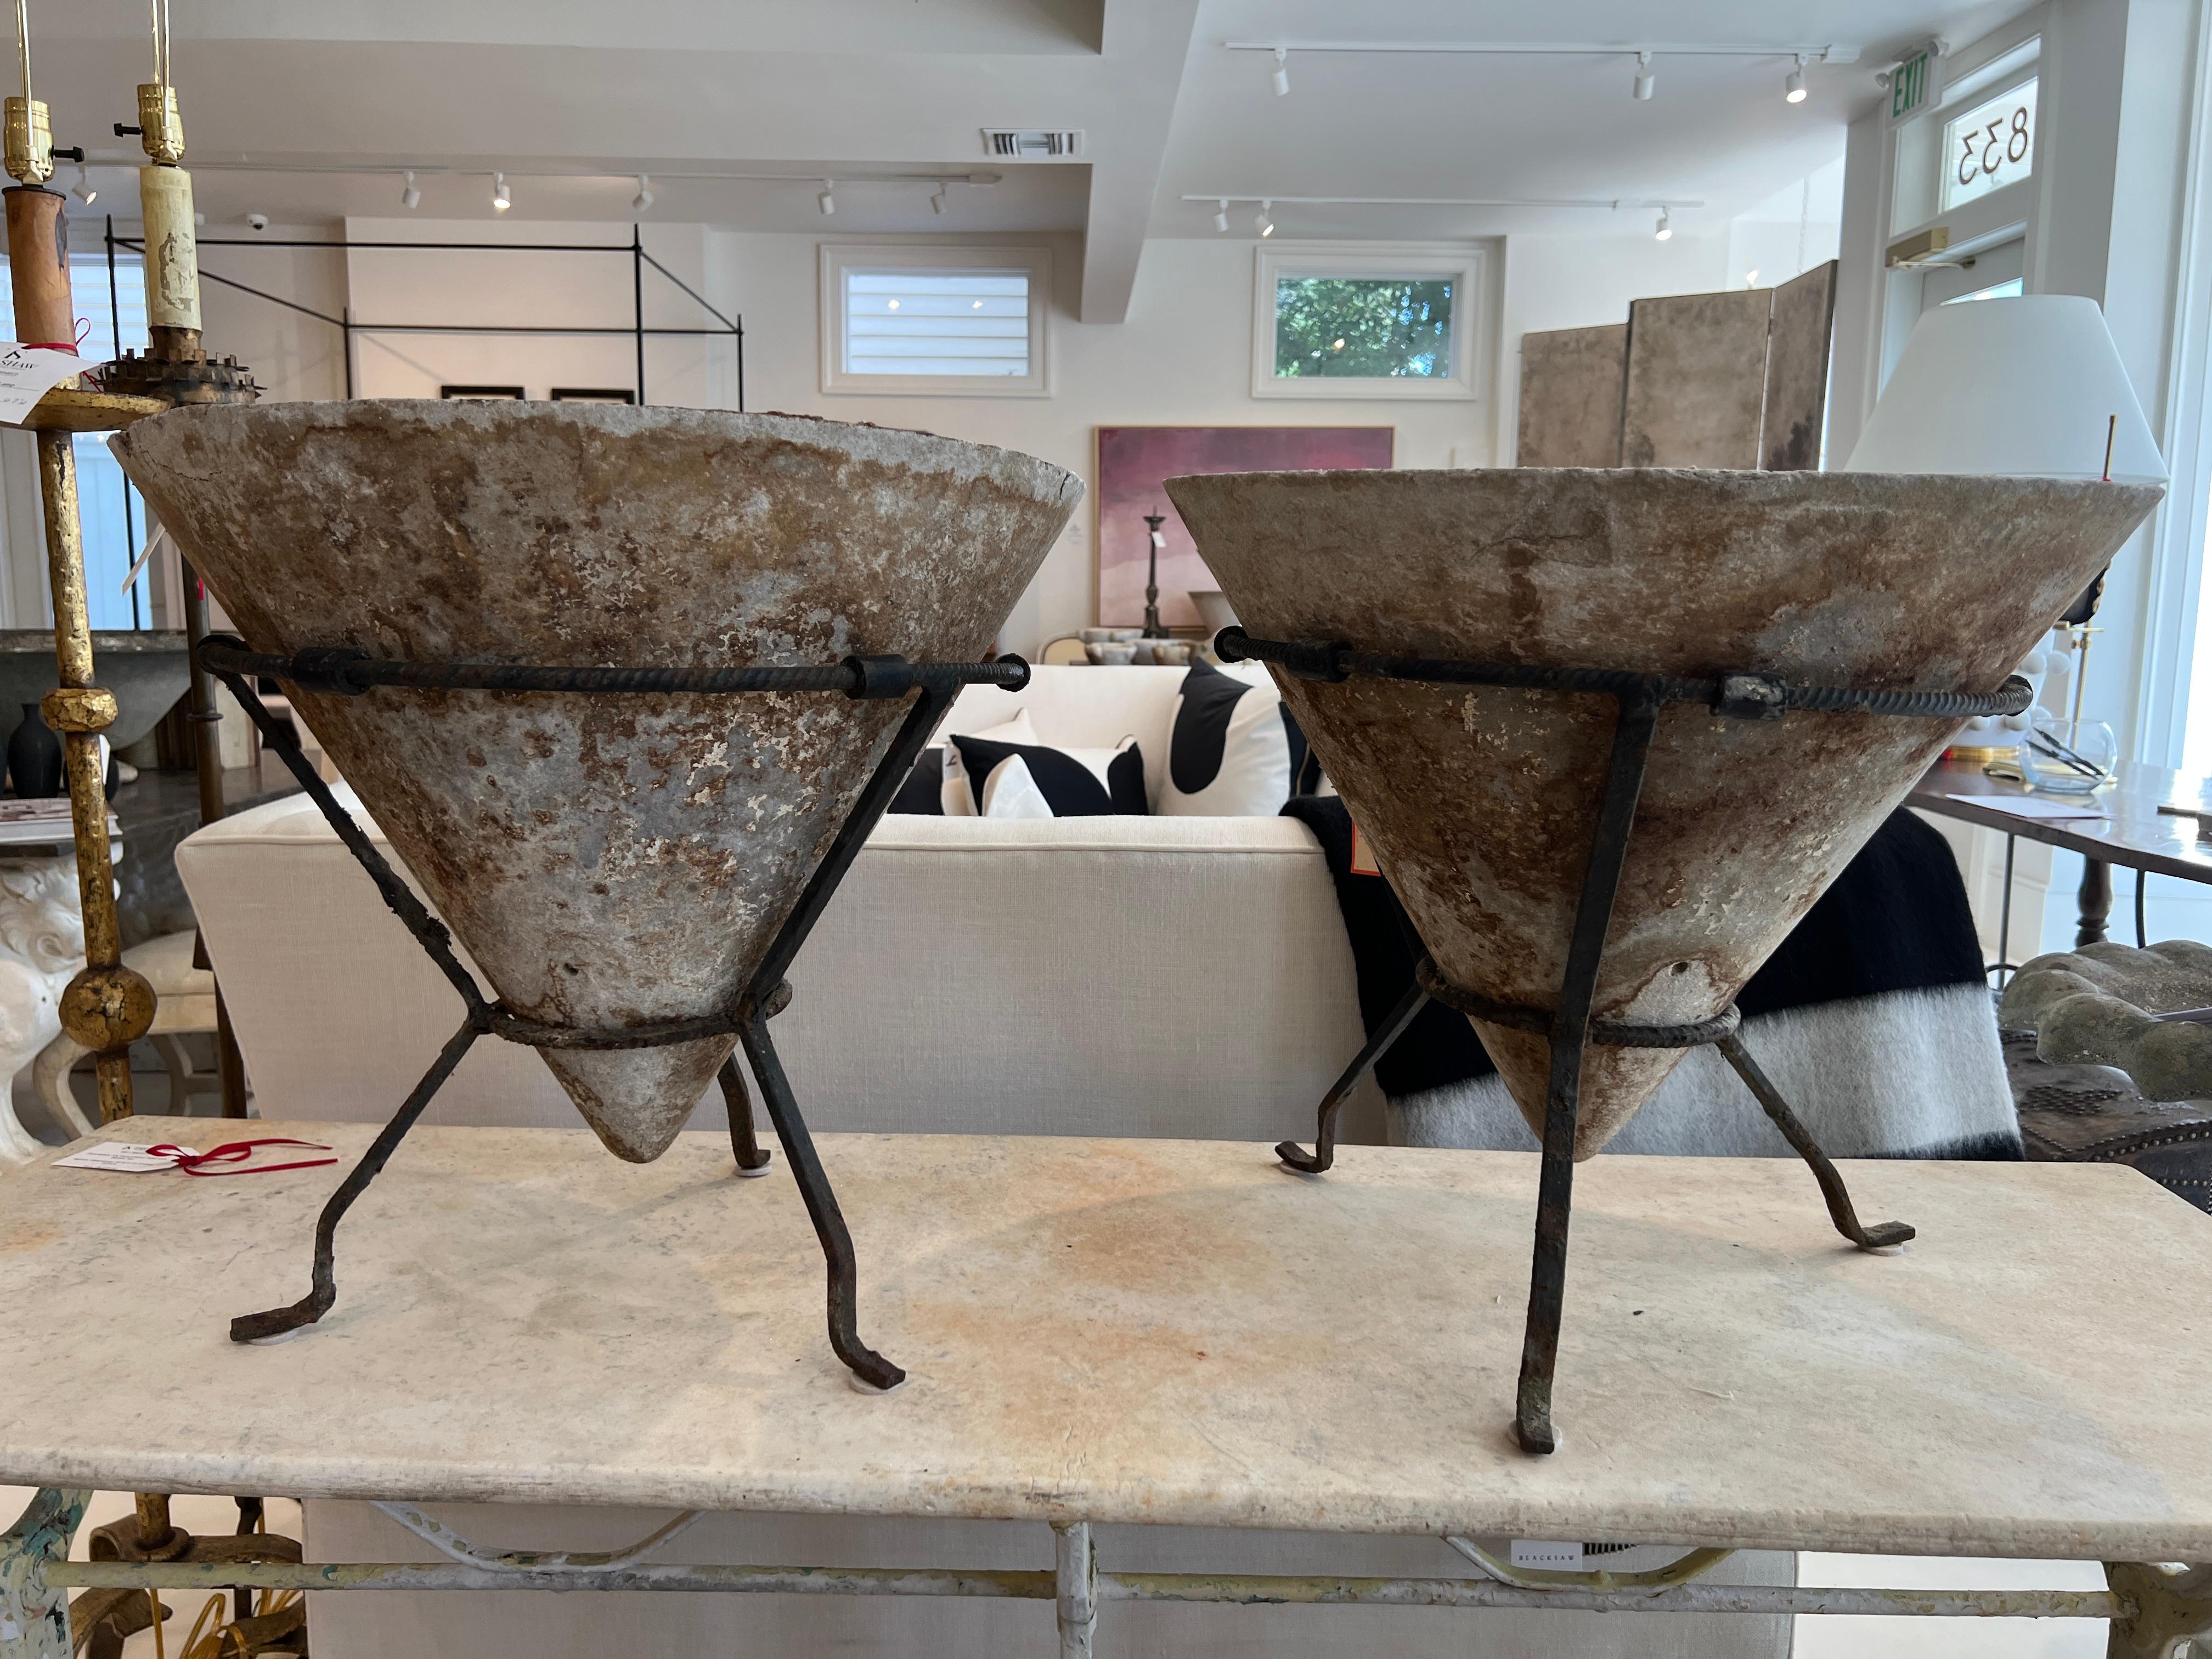 A pair of very unusual conical planters in customized iron stands.